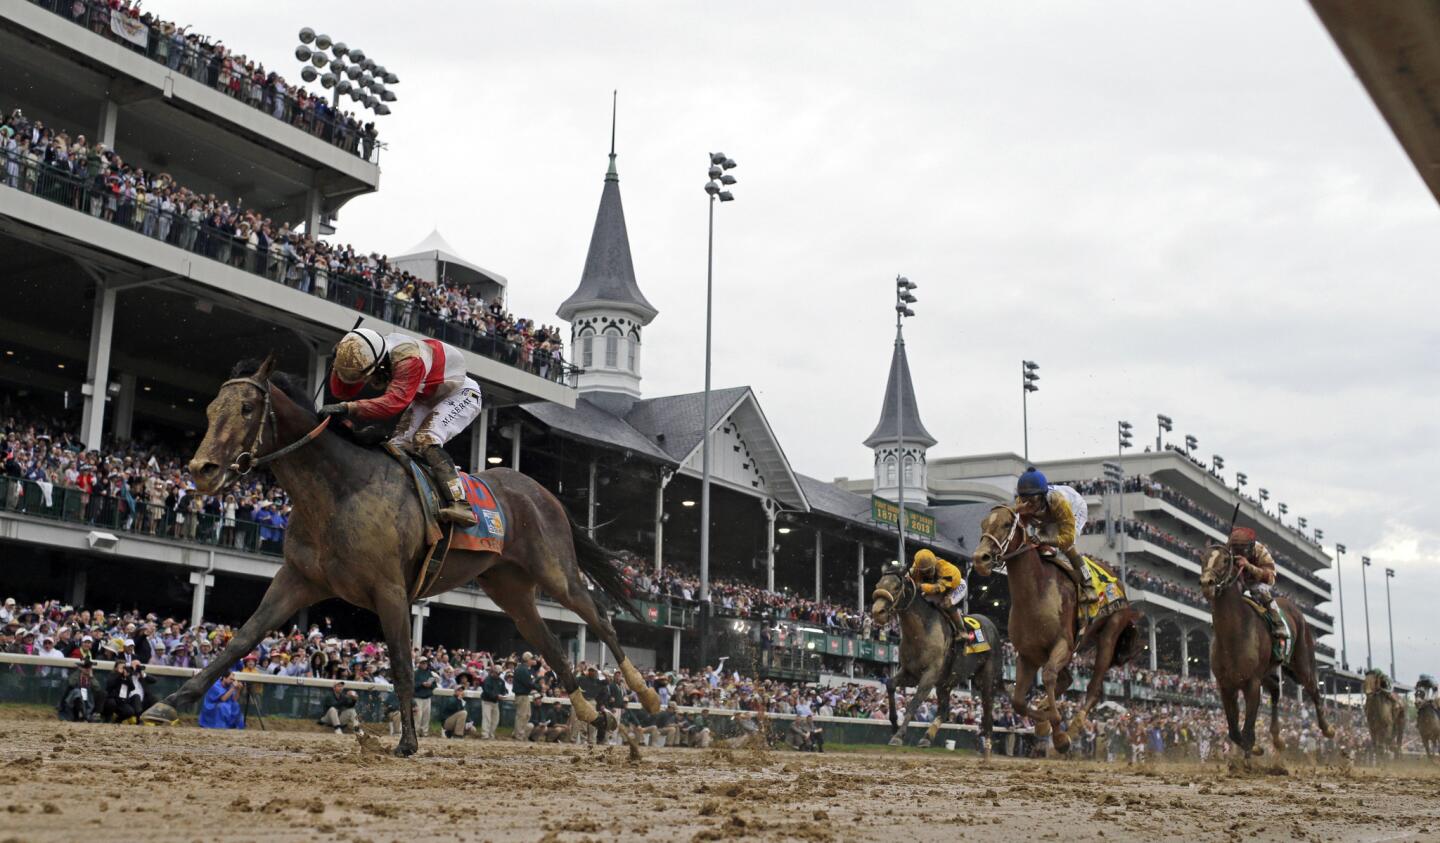 May is Louisville’s most popular month, for good reason. The Kentucky Derby, held at the beginning of the month, lures spectators from all over the world to watch the races.